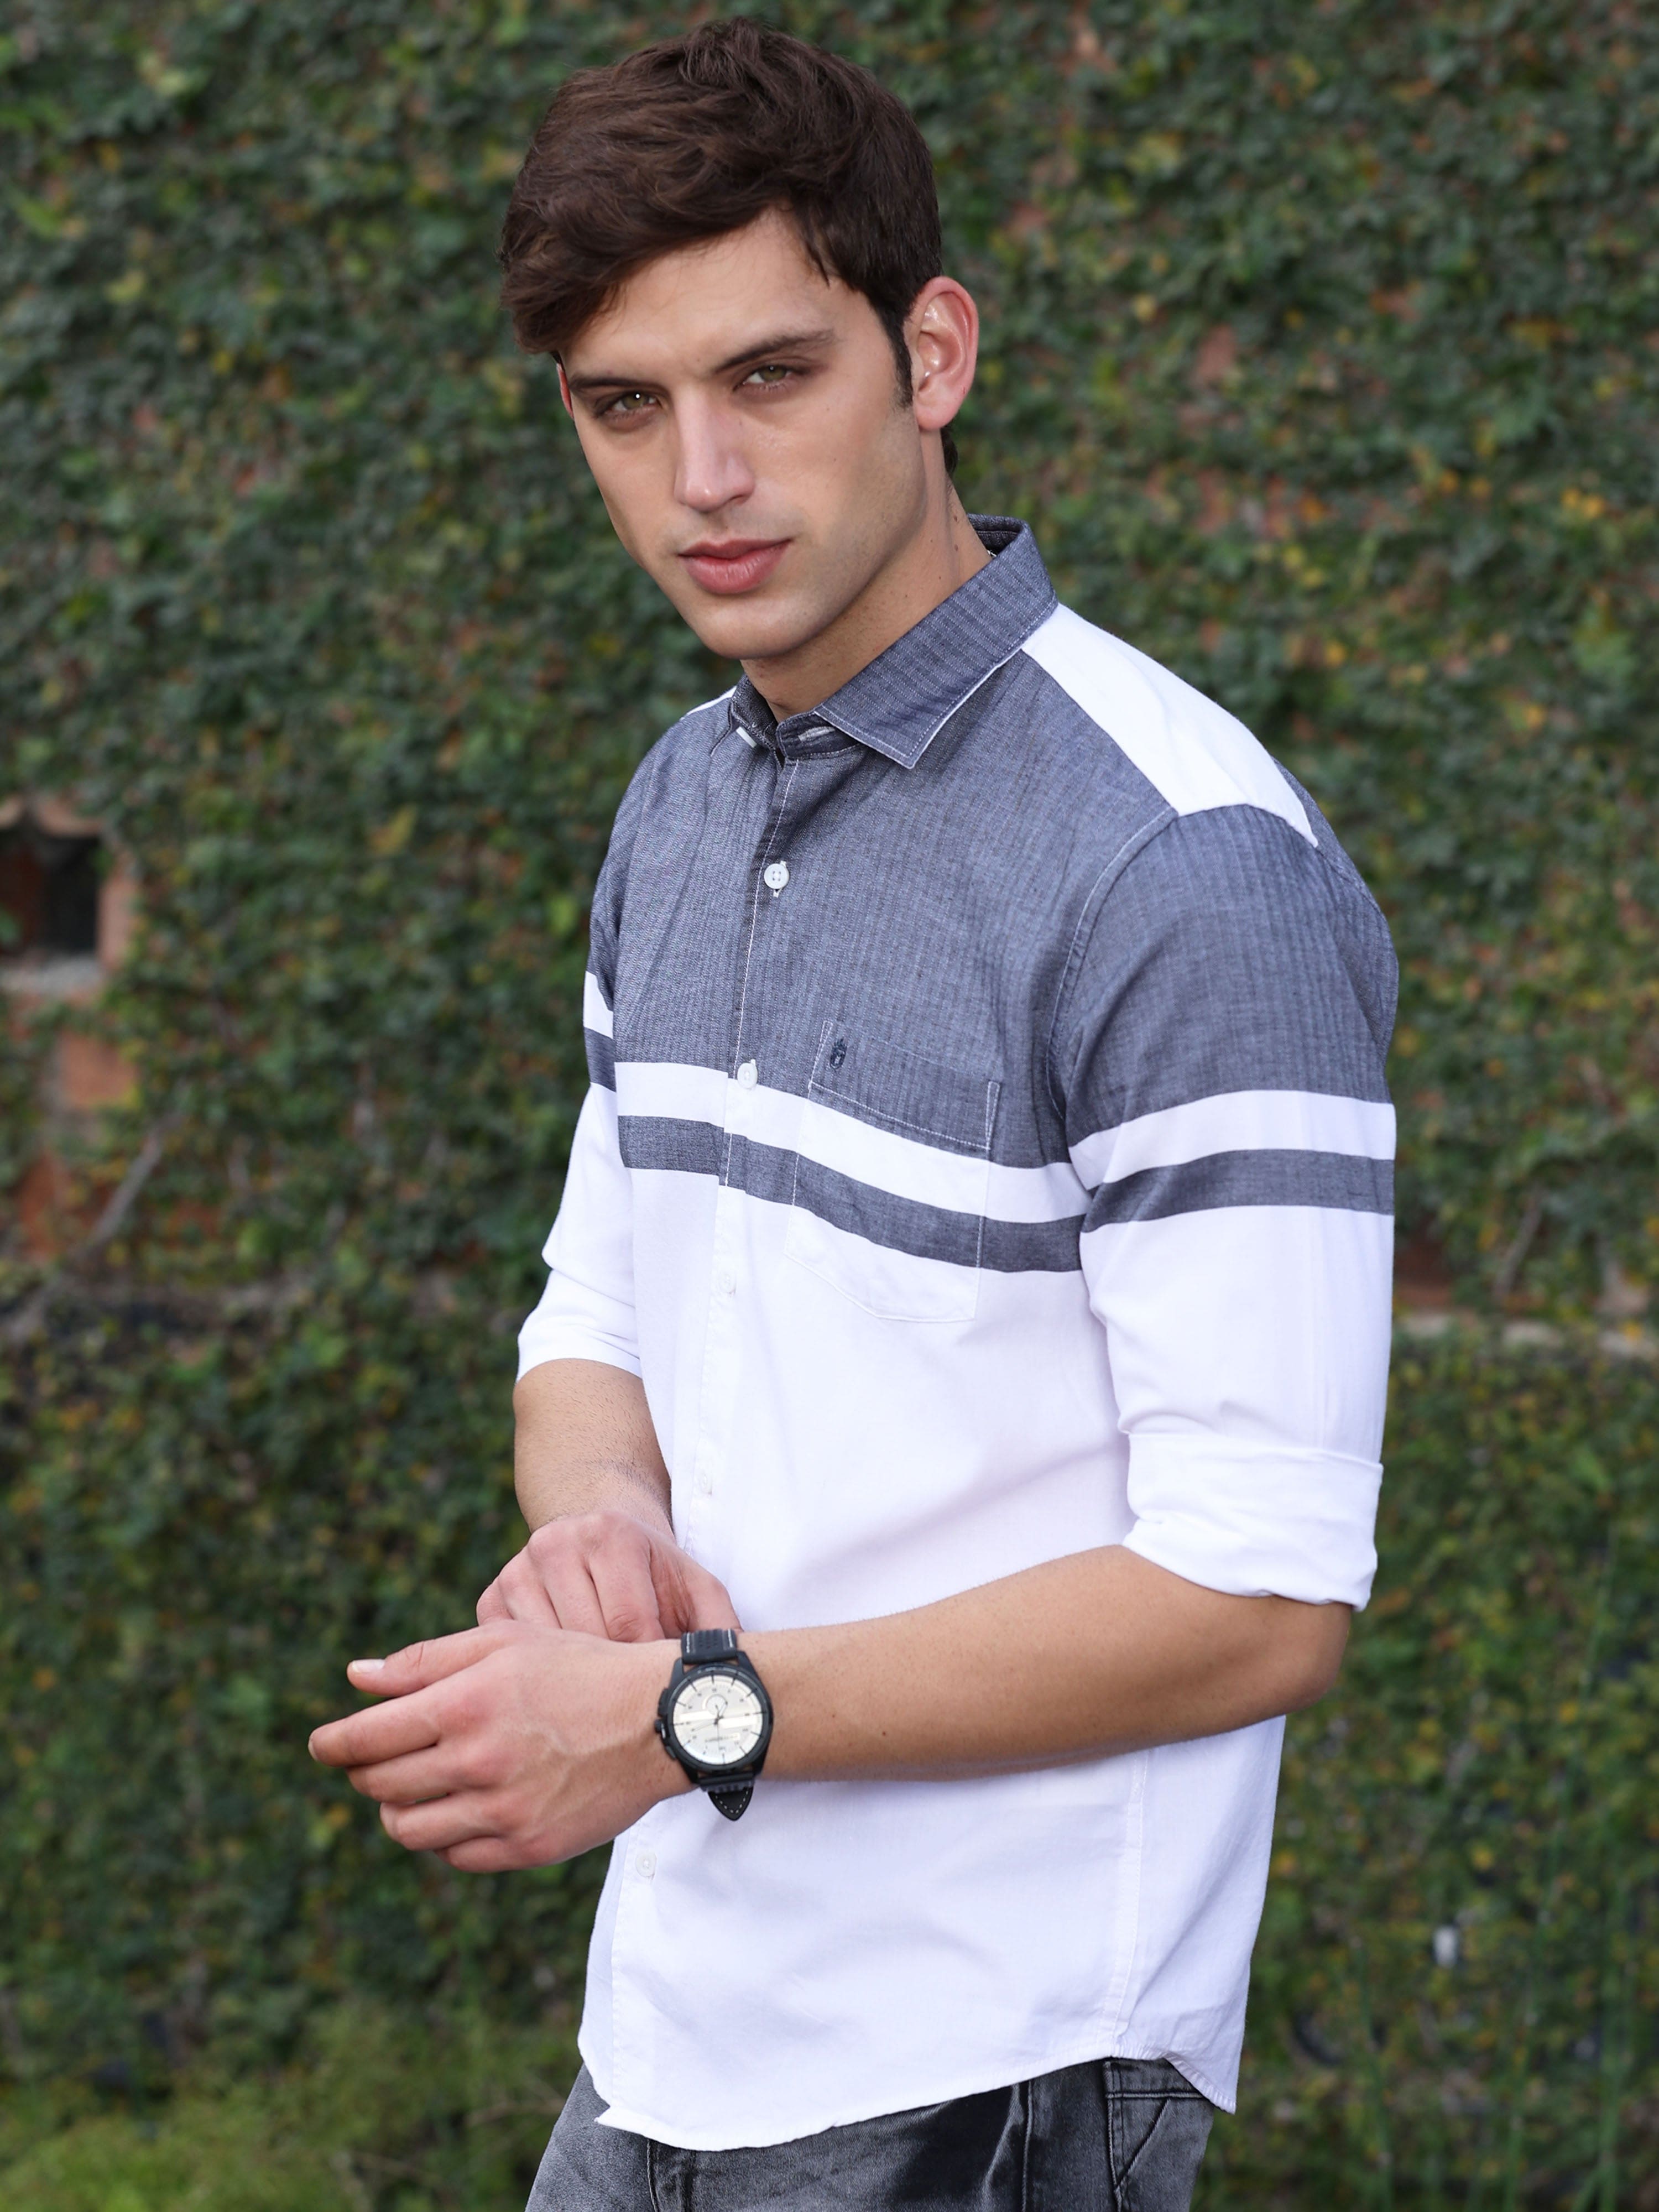 Buy White And Ash Striped Shirt Mens Full SleeveRs. 899.00